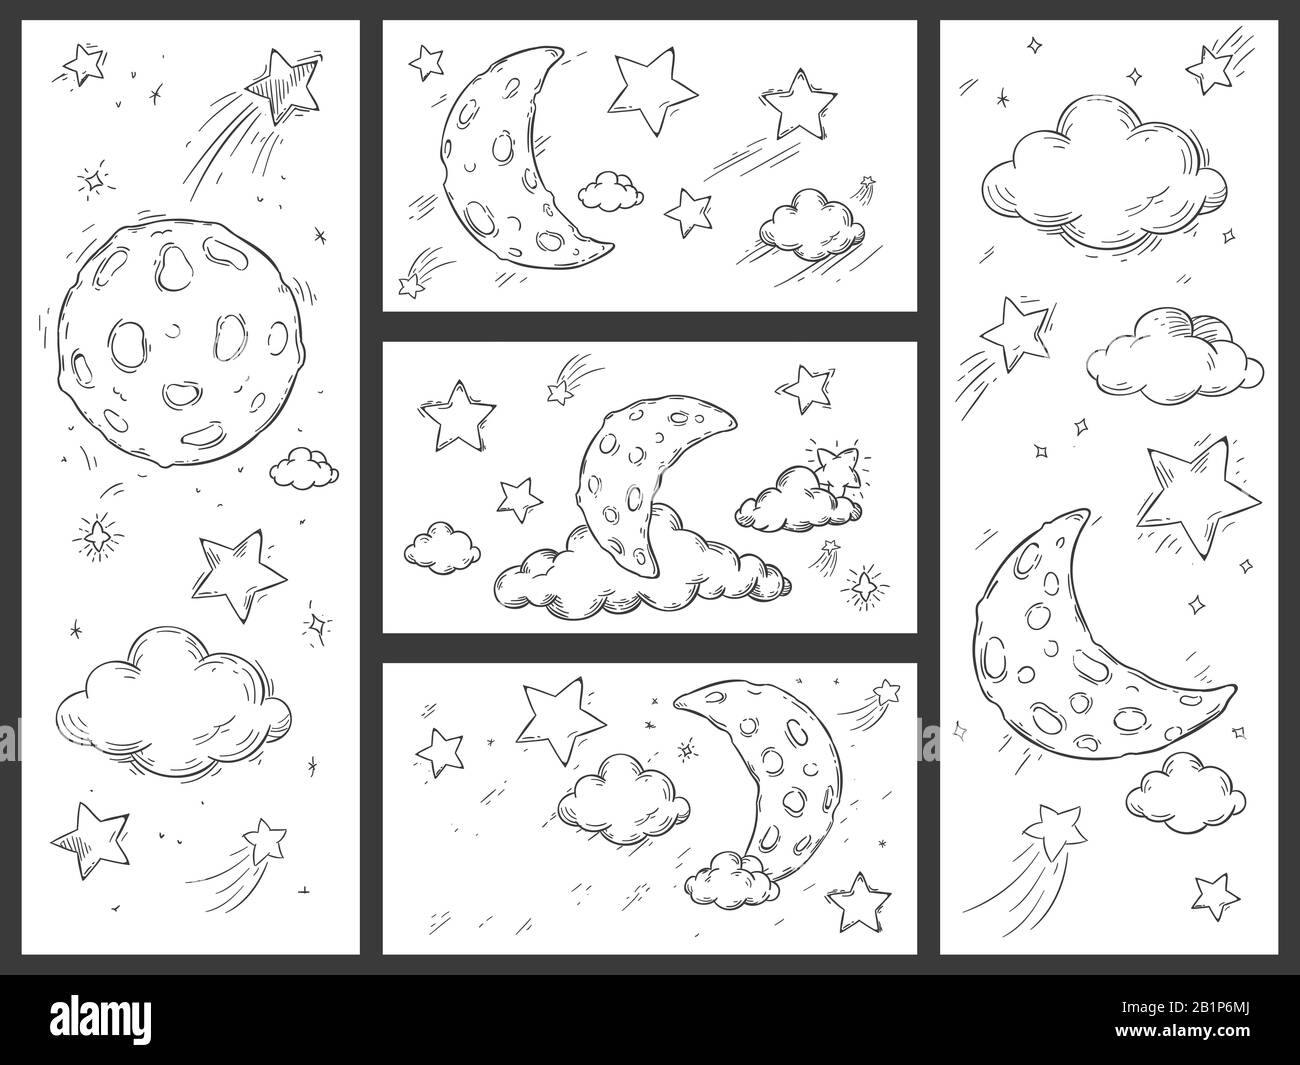 Details more than 140 sketch of night sky